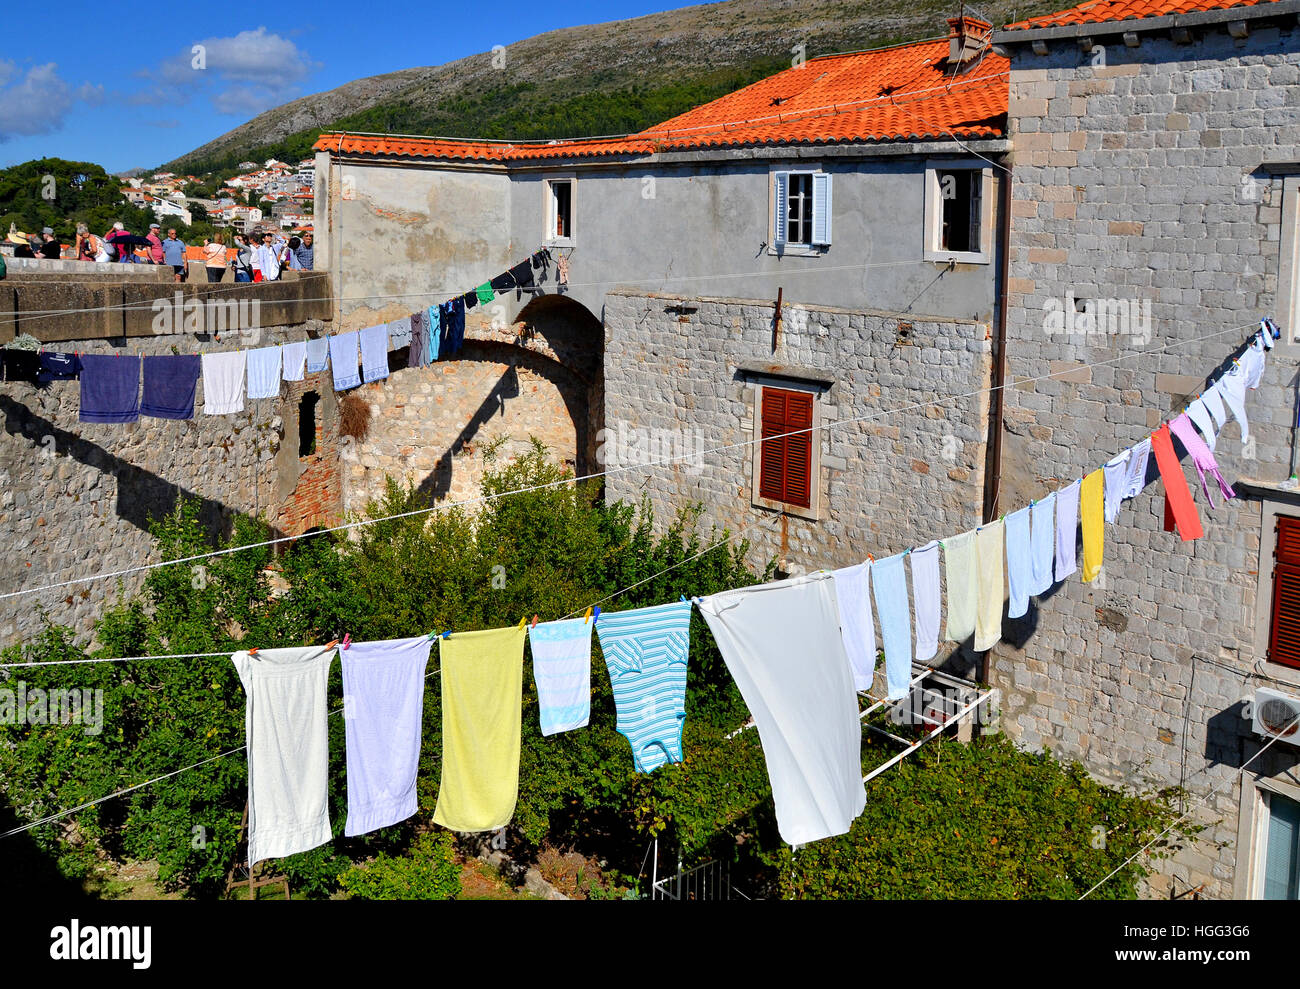 Washed clothes hanging out to dry in the old walled city of Dubrovnik, Croatia. Stock Photo